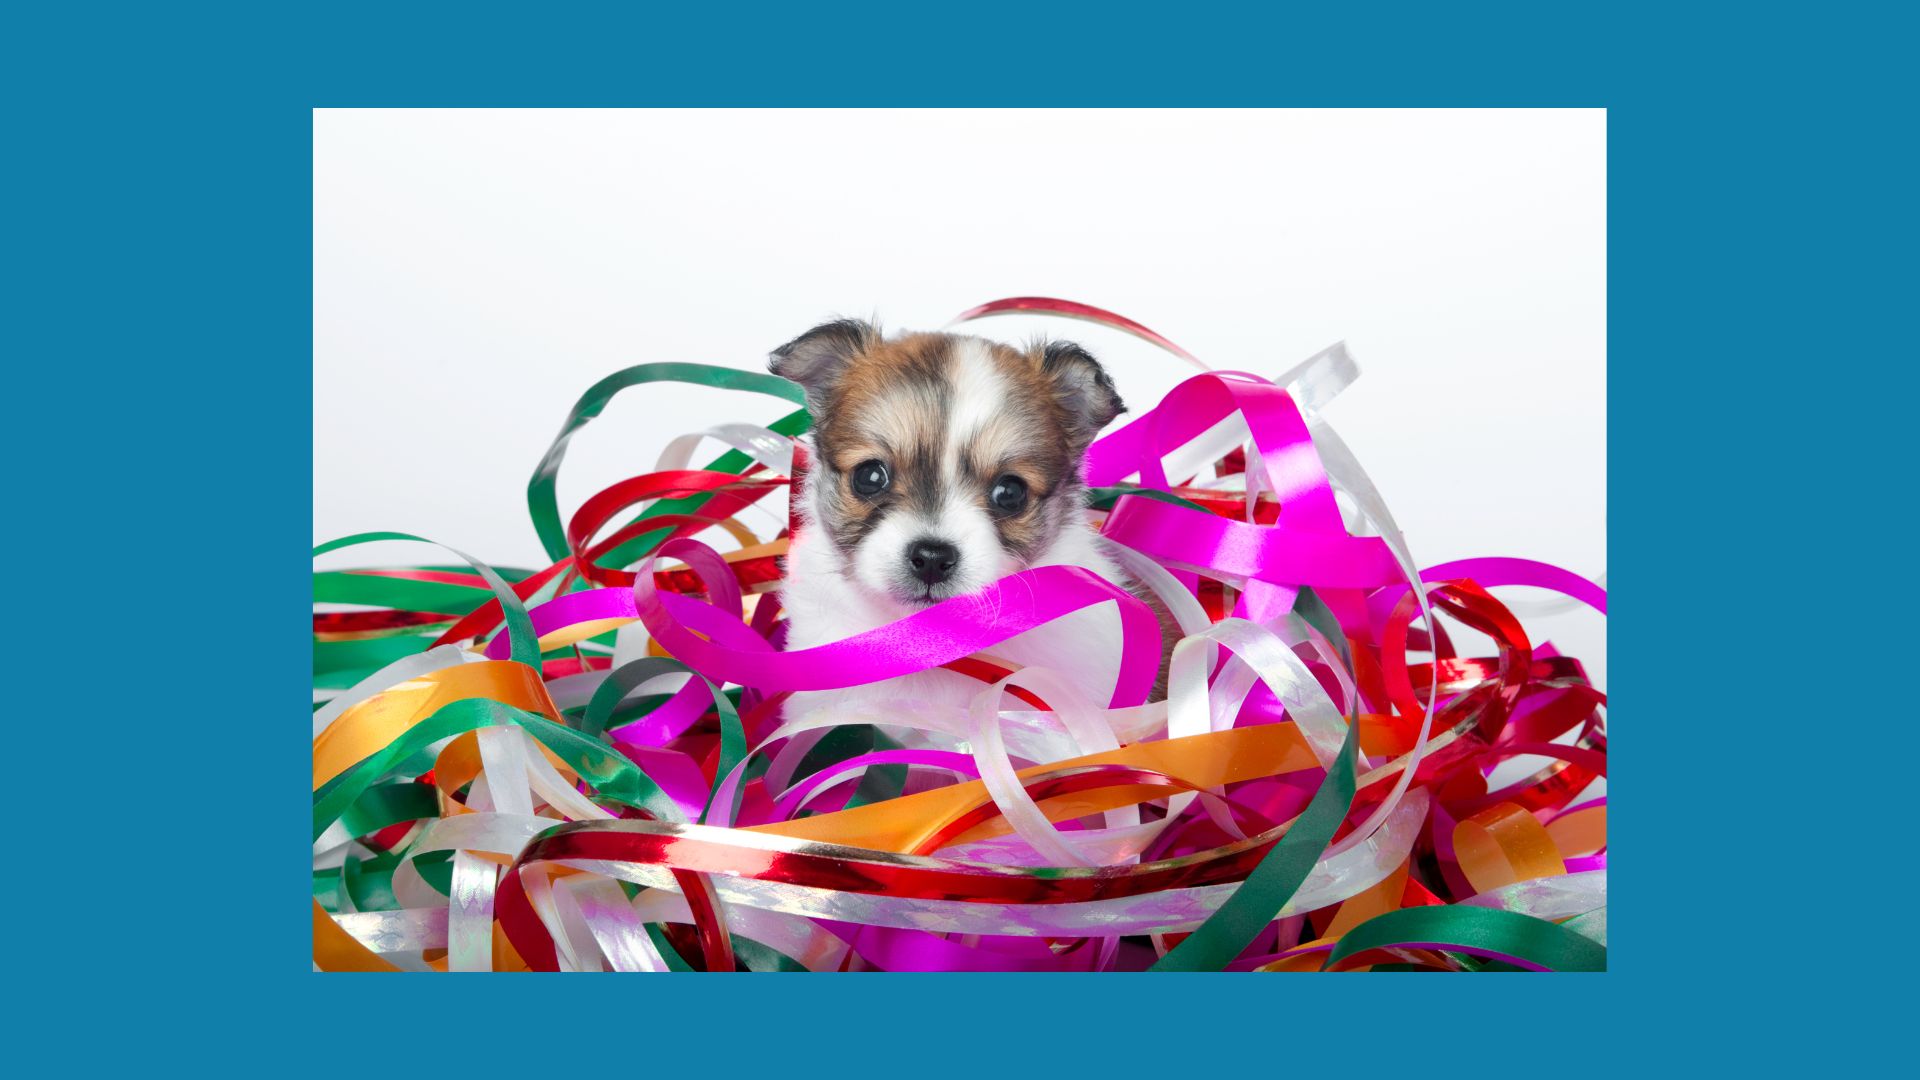 Puppy peeking out from tangle of bright ribbons of many colors